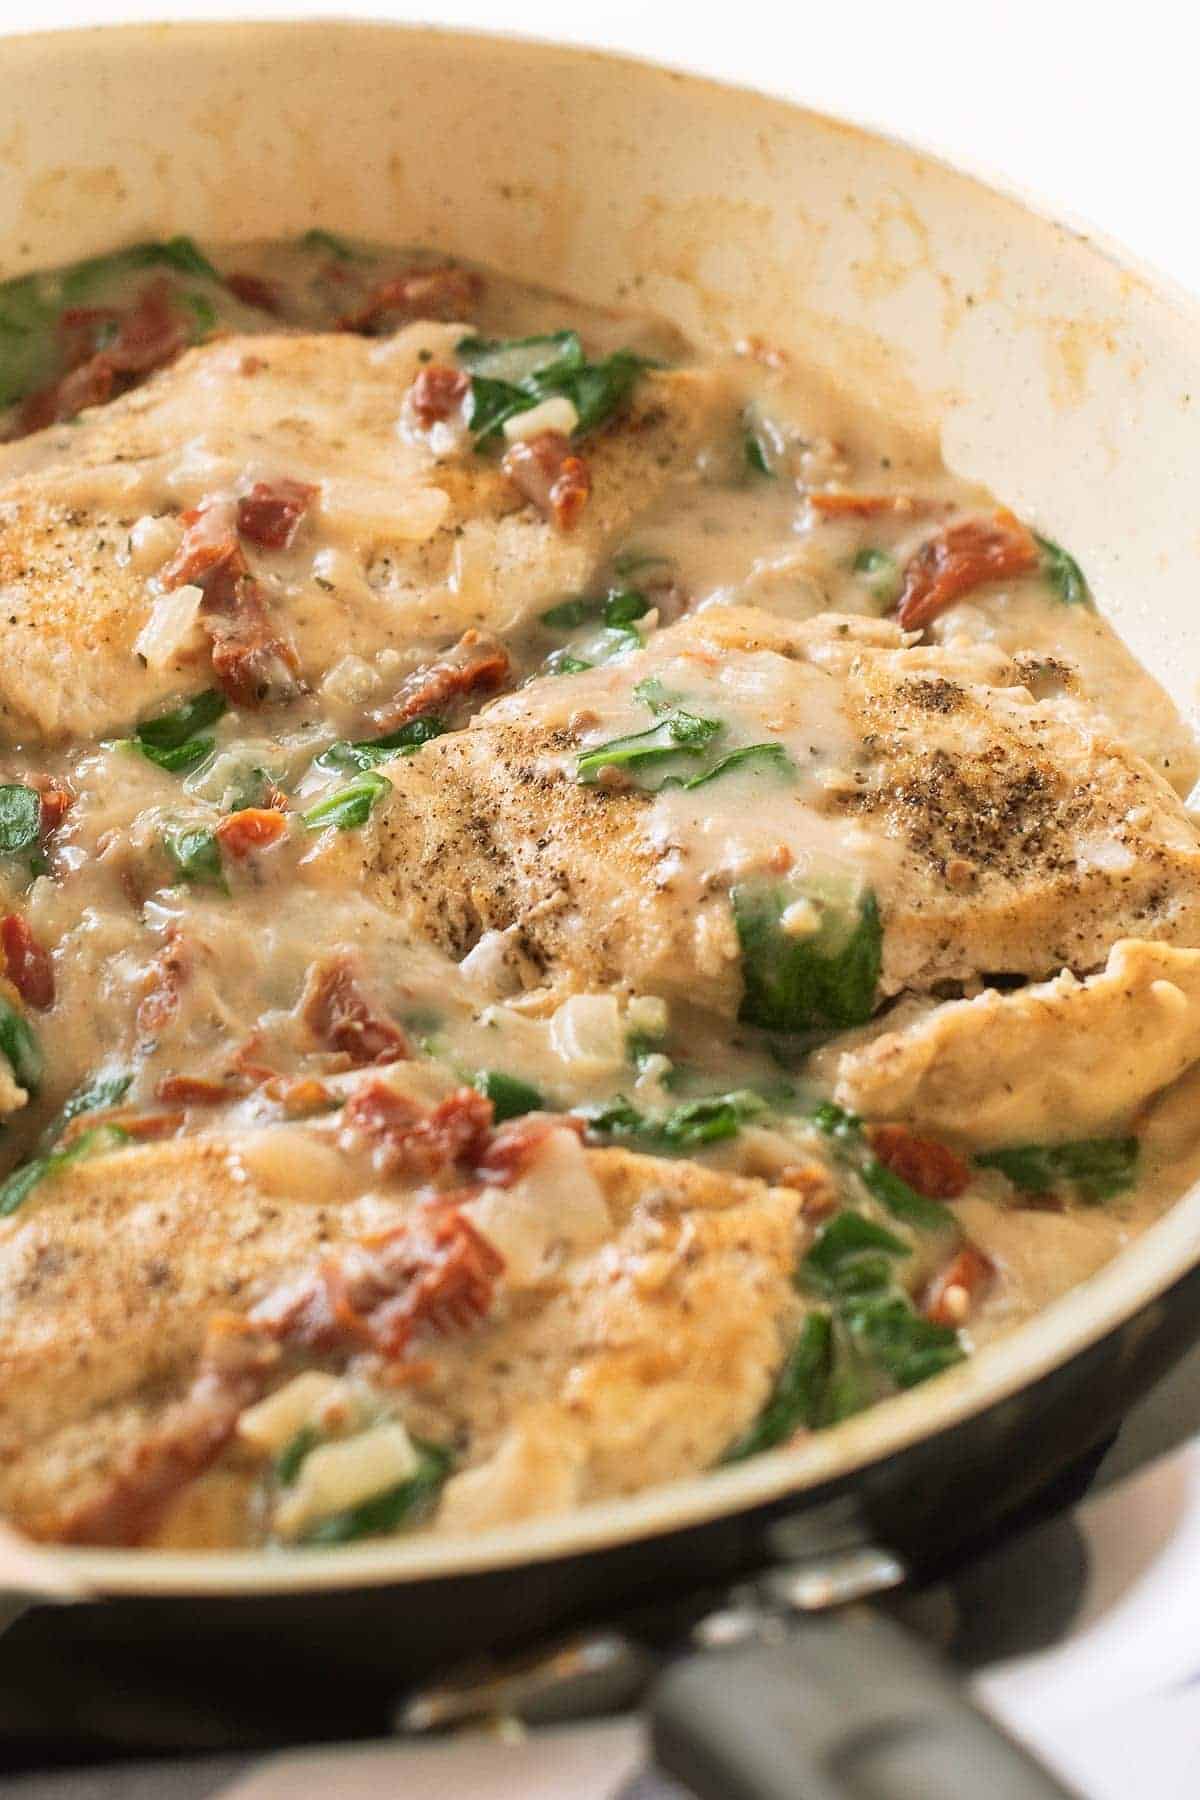 Keto Tuscan Chicken Recipe with Coconut Milk for creamy garlic sauce. Spinach, seasoned chicken and sun-dried tomatoes.